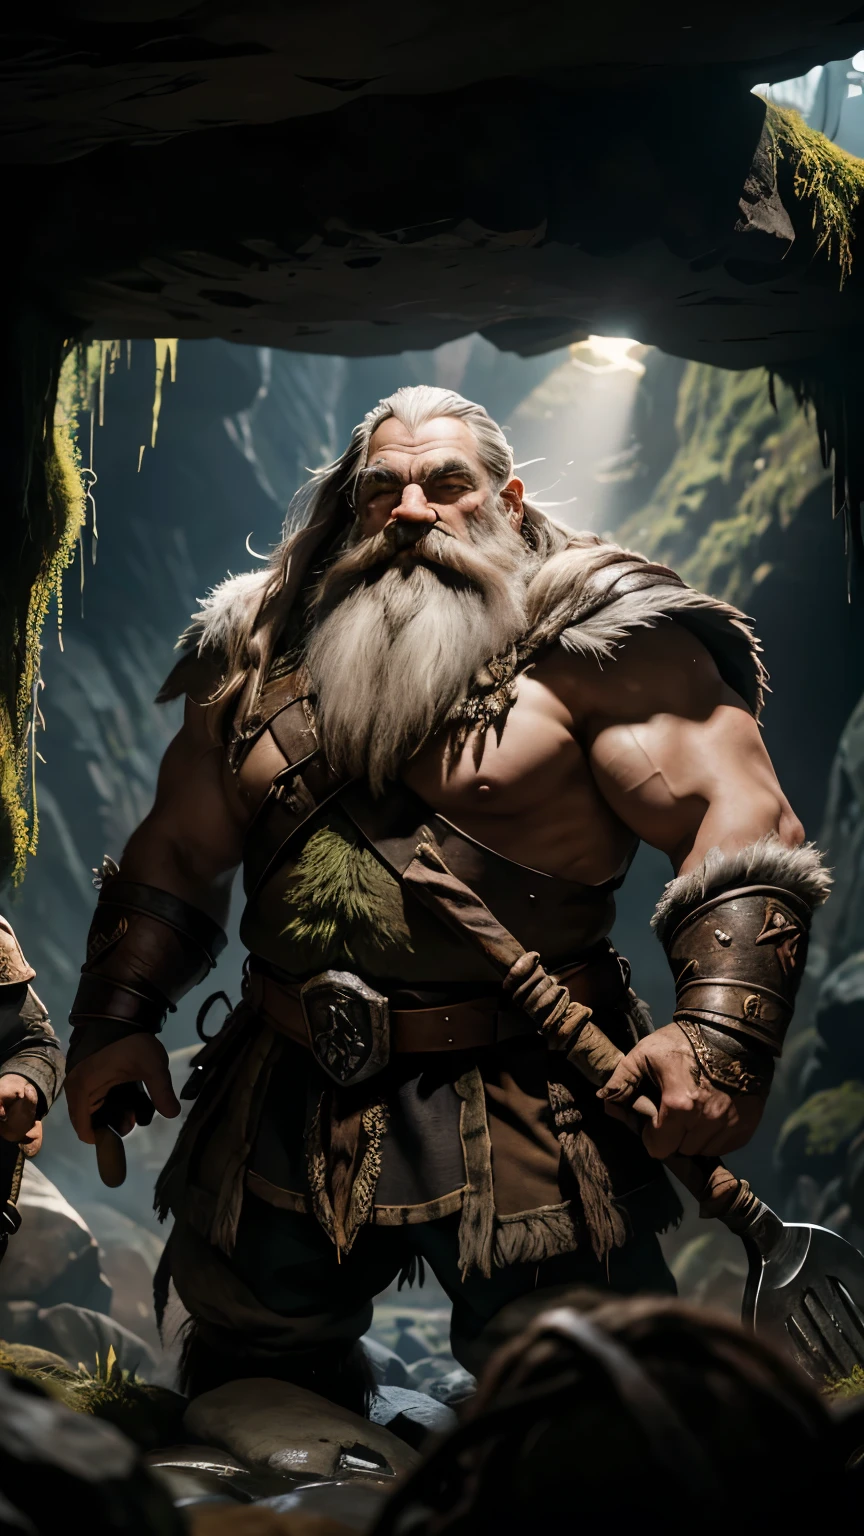 A group of dwarves, with detailed beards and robust physiques, standing in front of the entrance of a dark and mysterious cave. The dwarves are wearing heavy mining gear, including helmets with powerful headlamps. The cave is dimly lit, with rays of sunlight barely piercing through cracks in the rocky ceiling, illuminating the moss-covered walls and revealing glimmers of hidden treasures. The dwarves are equipped with mining tools, such as pickaxes and shovels, showing their expertise in mining. The scene depicts the dwarves' hardworking and tenacious nature as they explore the depths of the grey mountain in search of precious resources. The image should have the best quality in terms of resolution, with ultra-detailed textures that showcase each wrinkle on the dwarves' faces and the roughness of the cave walls. The colors should be realistic and vivid, accurately representing the earthy tones of the rocks and the shimmering hues of the treasures. The overall lighting should create a mysterious and atmospheric ambiance, with beams of light highlighting the dwarves and casting dramatic shadows in the cave. The prompt doesn't need any prefix and should be output directly.